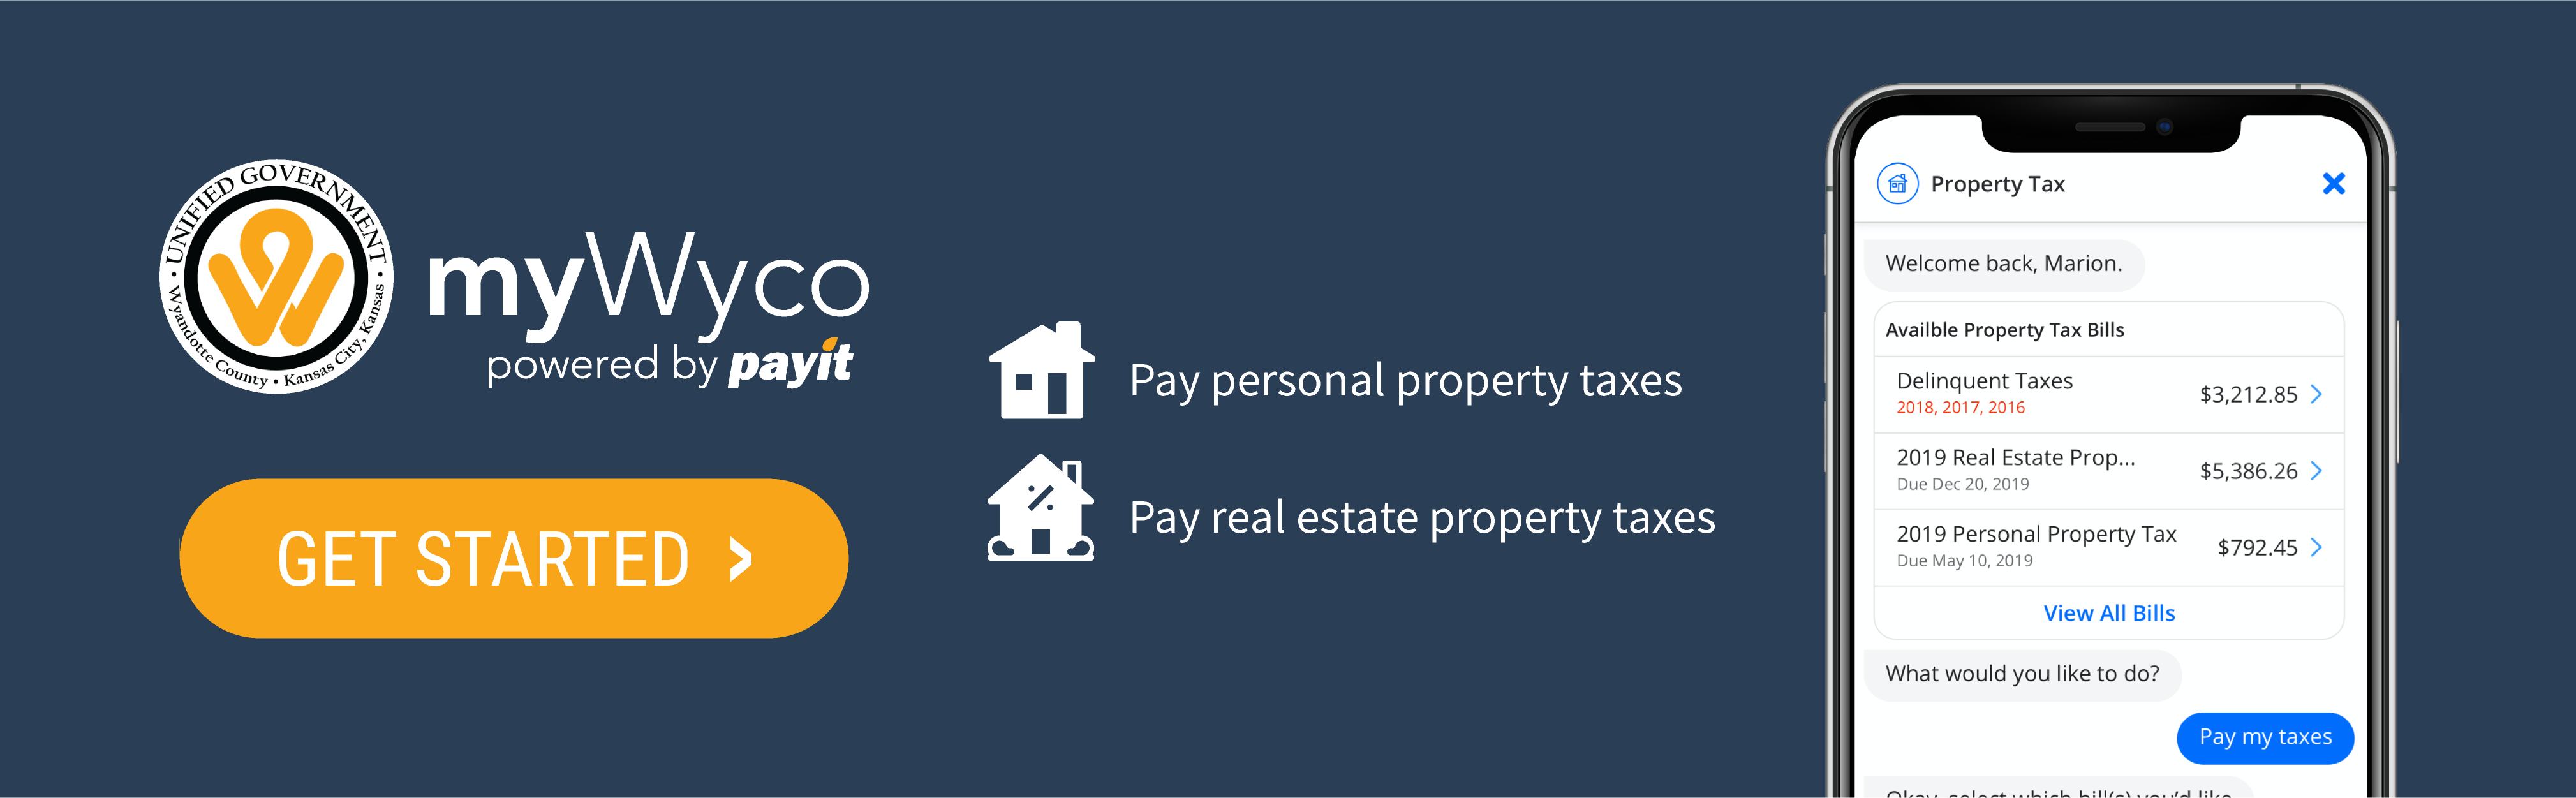 myWyco_Web-Placements_Property-Taxes_Hero_969x300_2.png